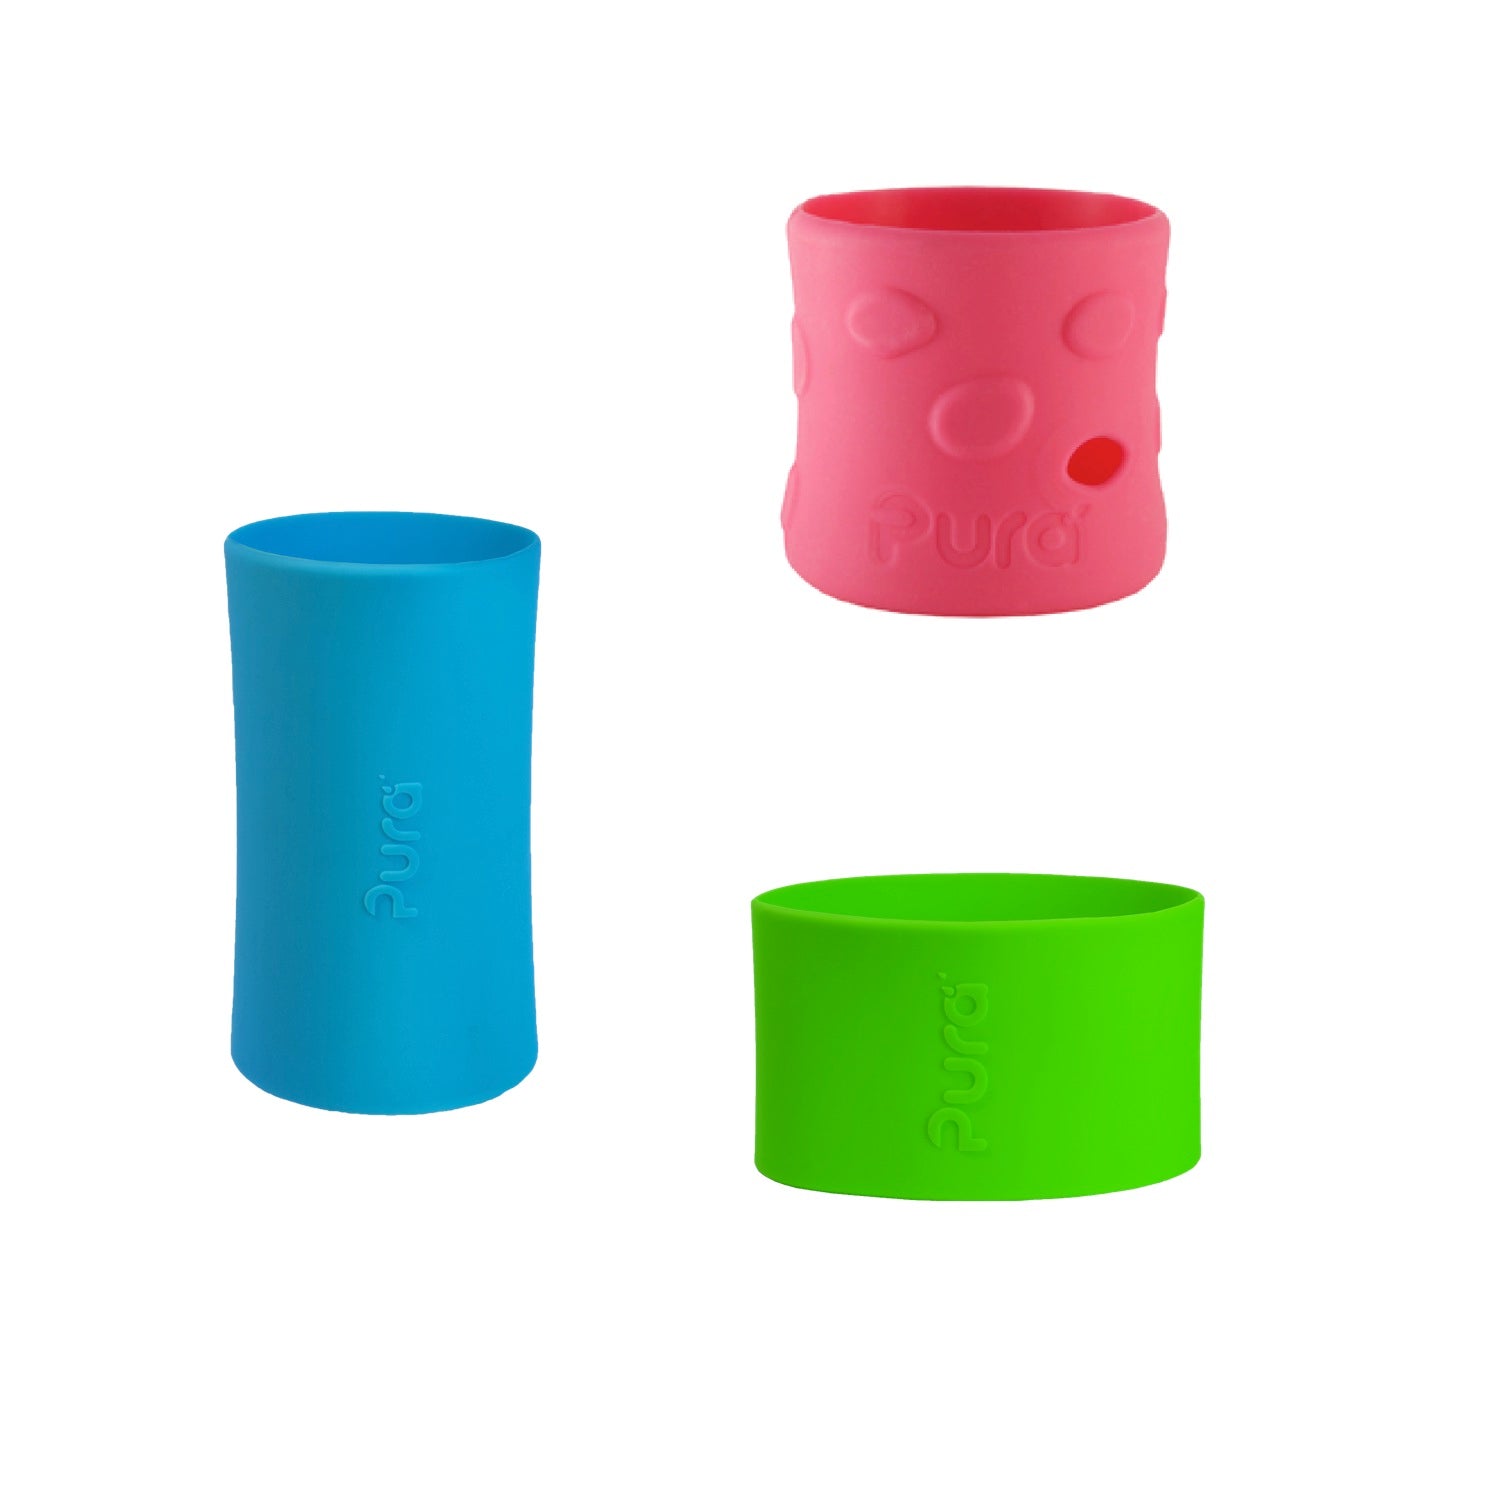 Pura ~ Silicone Bottle Sleeves – MADE SAFE a program of Nontoxic Certified